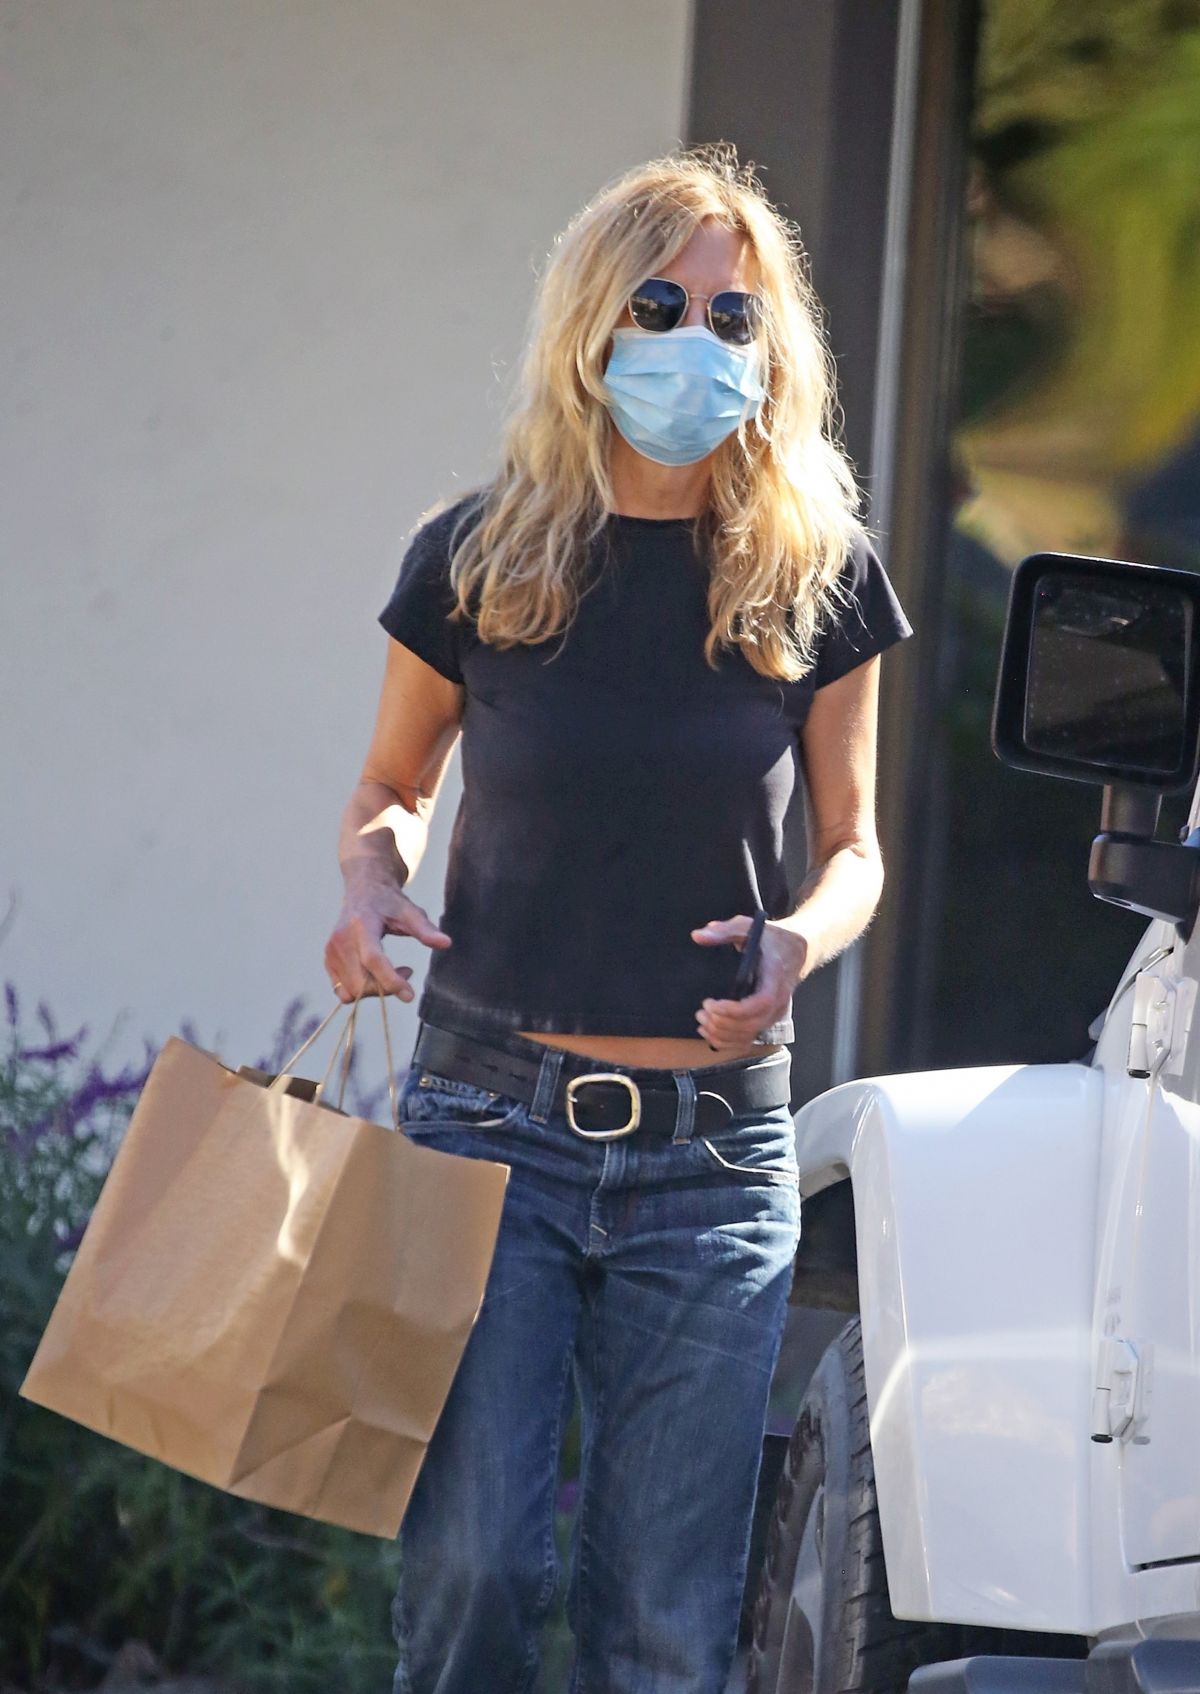 meg-ryan-out-and-about-in-brentwood-10-31-2020-5.jpg